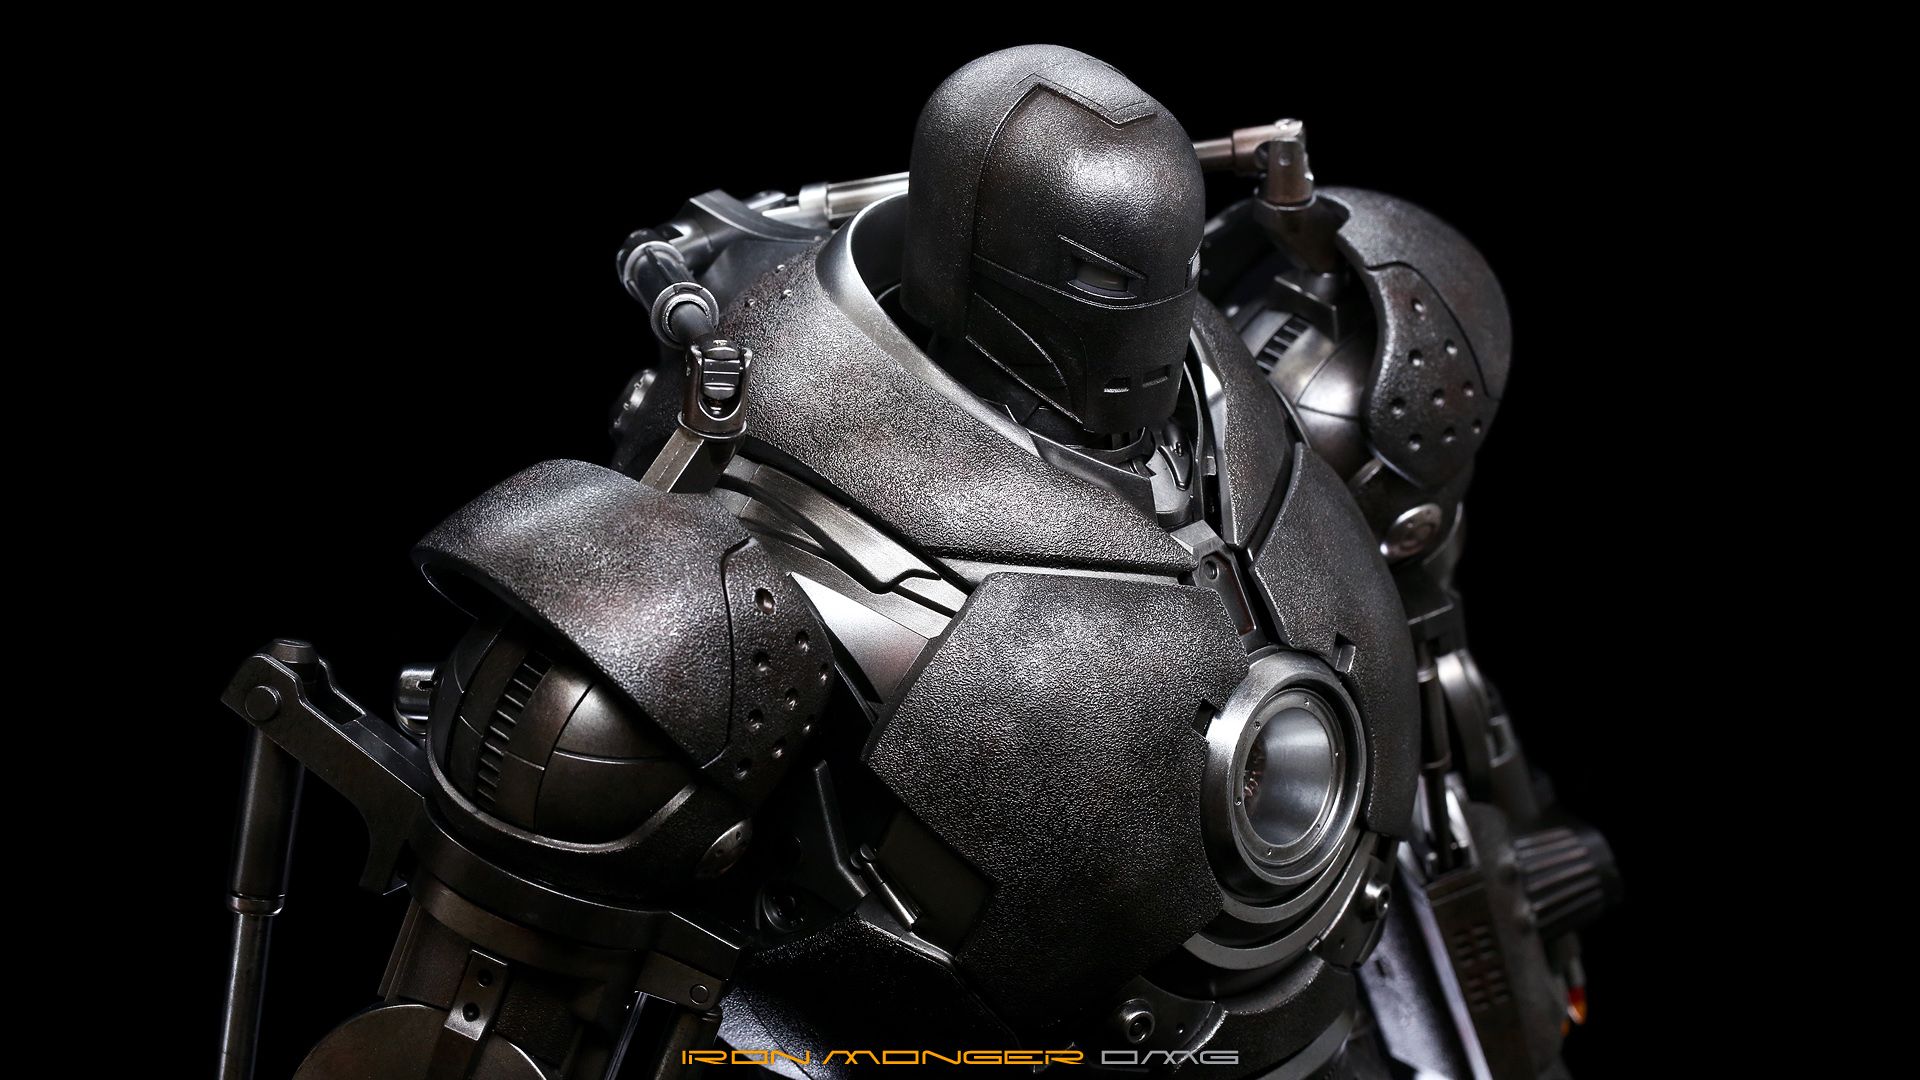 [Hot Toys] Iron Man: Iron Monger 1/6th scale - Limited Edition Collectible Figurine - Página 9 IronMongerHD179_zpsc4ce6f62